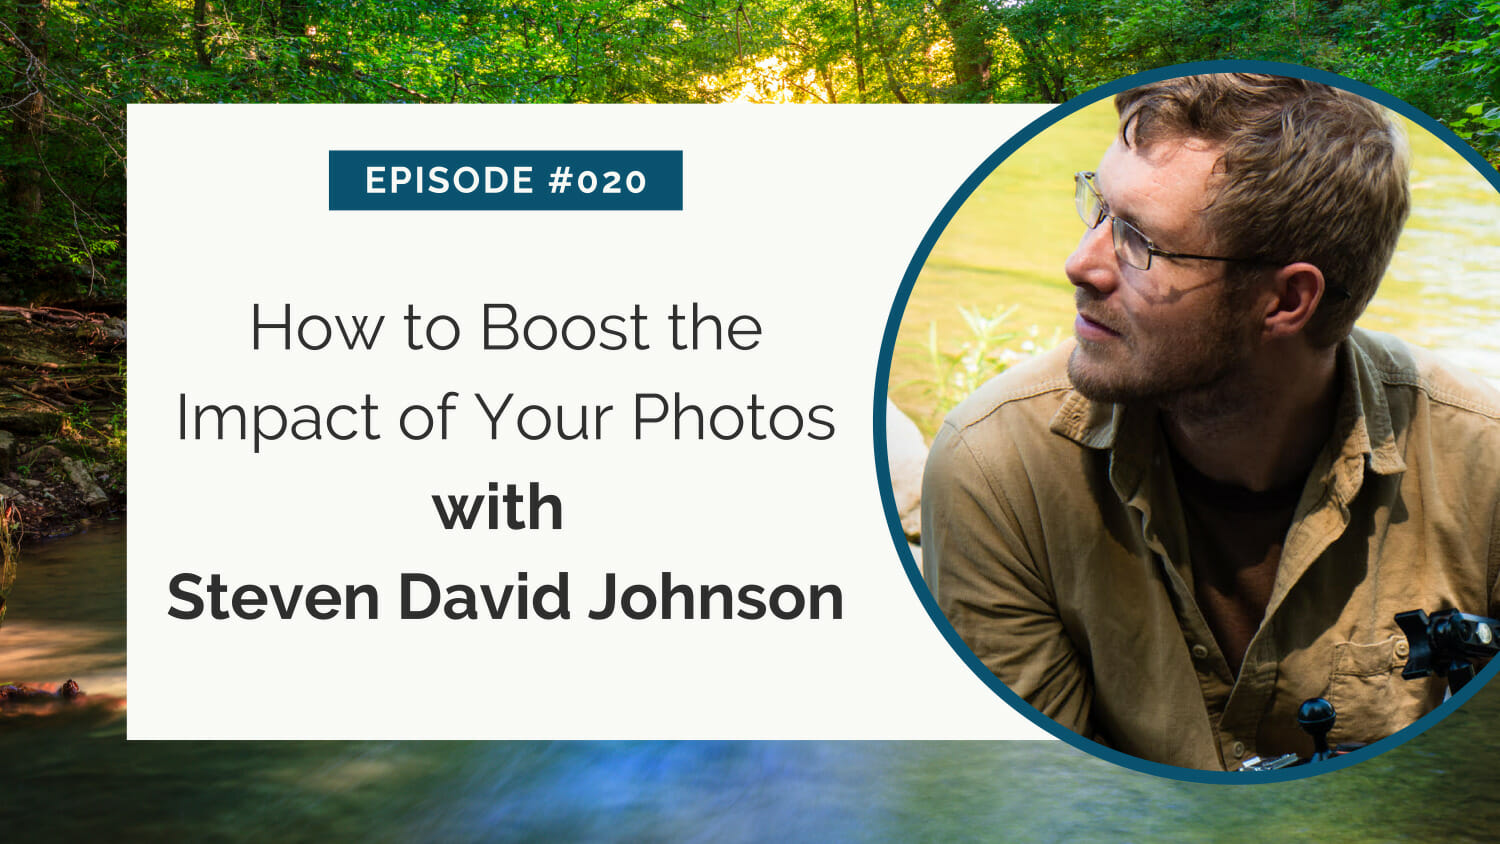 Podcast episode #020: enhancing photo impact with guest steven david johnson.